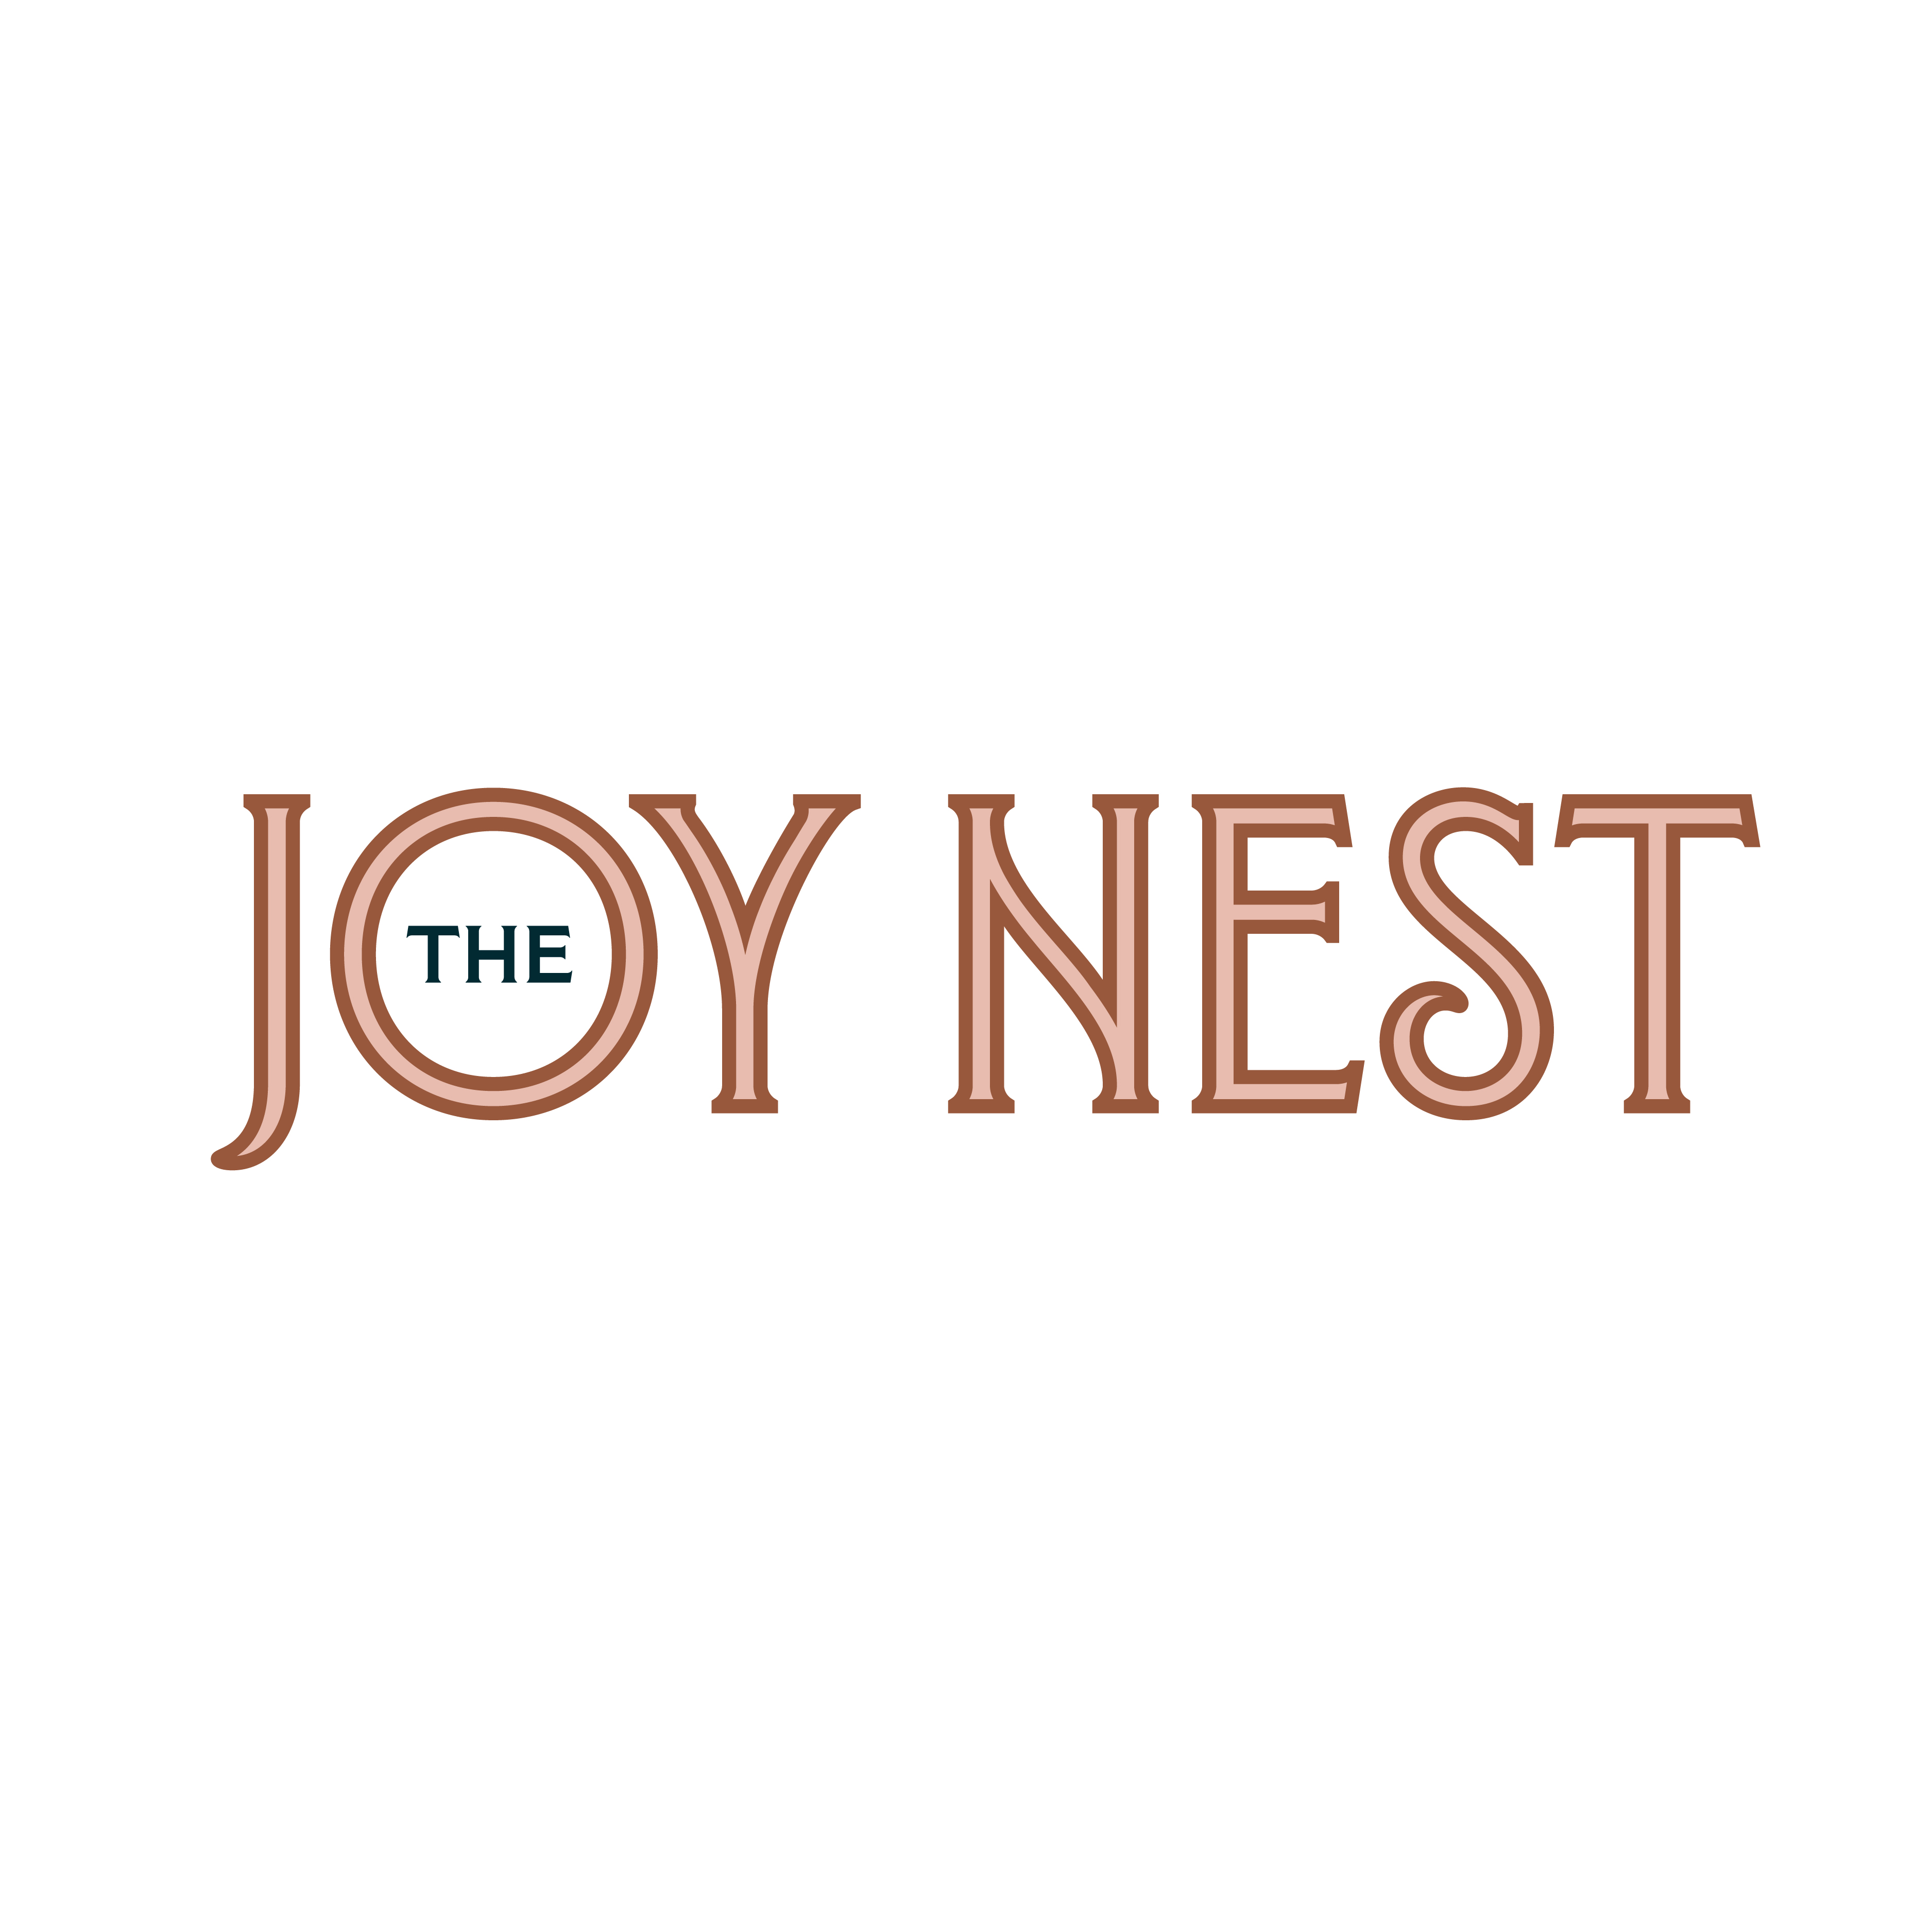 The Joy Nest logo design by logo designer Favor the Brave for your inspiration and for the worlds largest logo competition